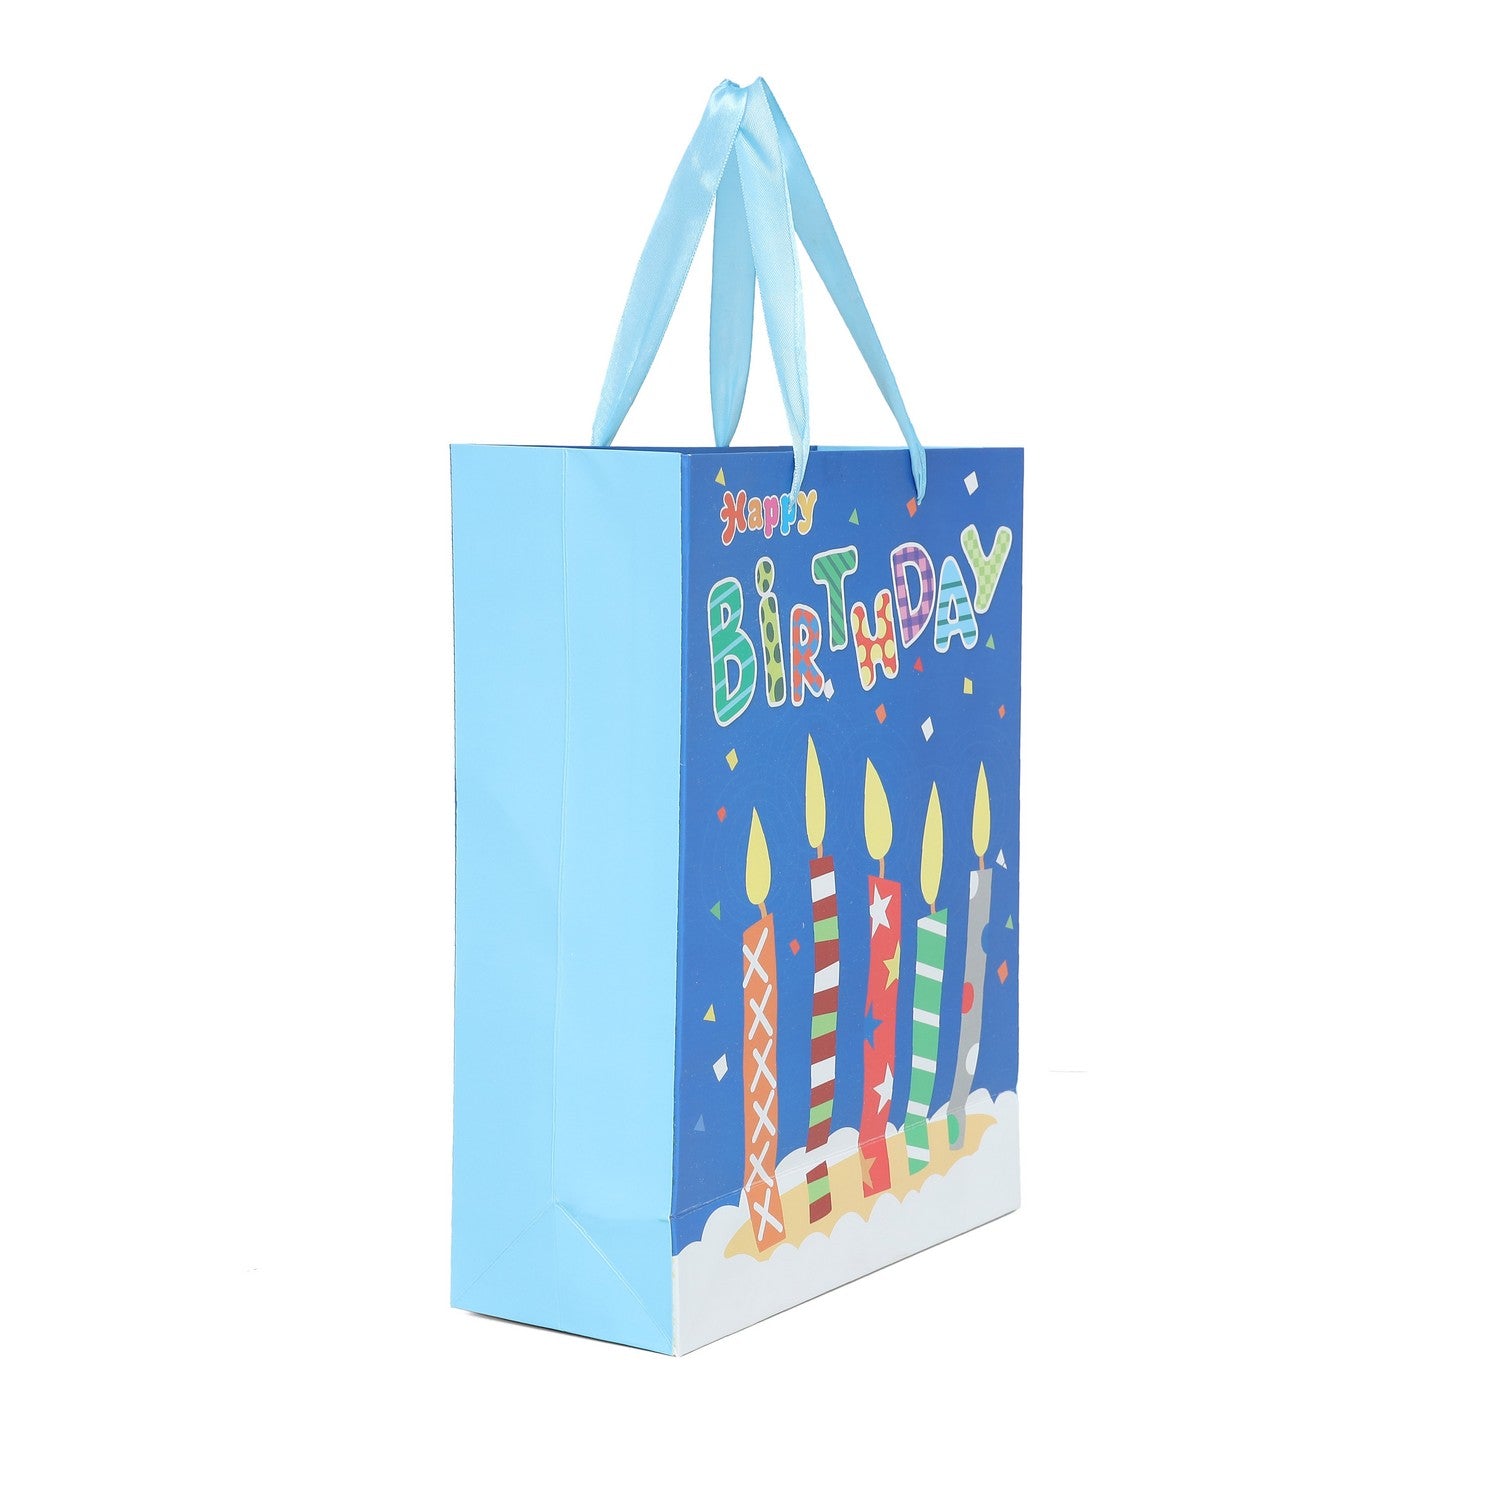 SHUBAN 5 Candle Birthday Paper Bag for Gifting, Birthday Presents (32 X 26 X 10 CM ) - Set of 5 | Book Bargain Buy